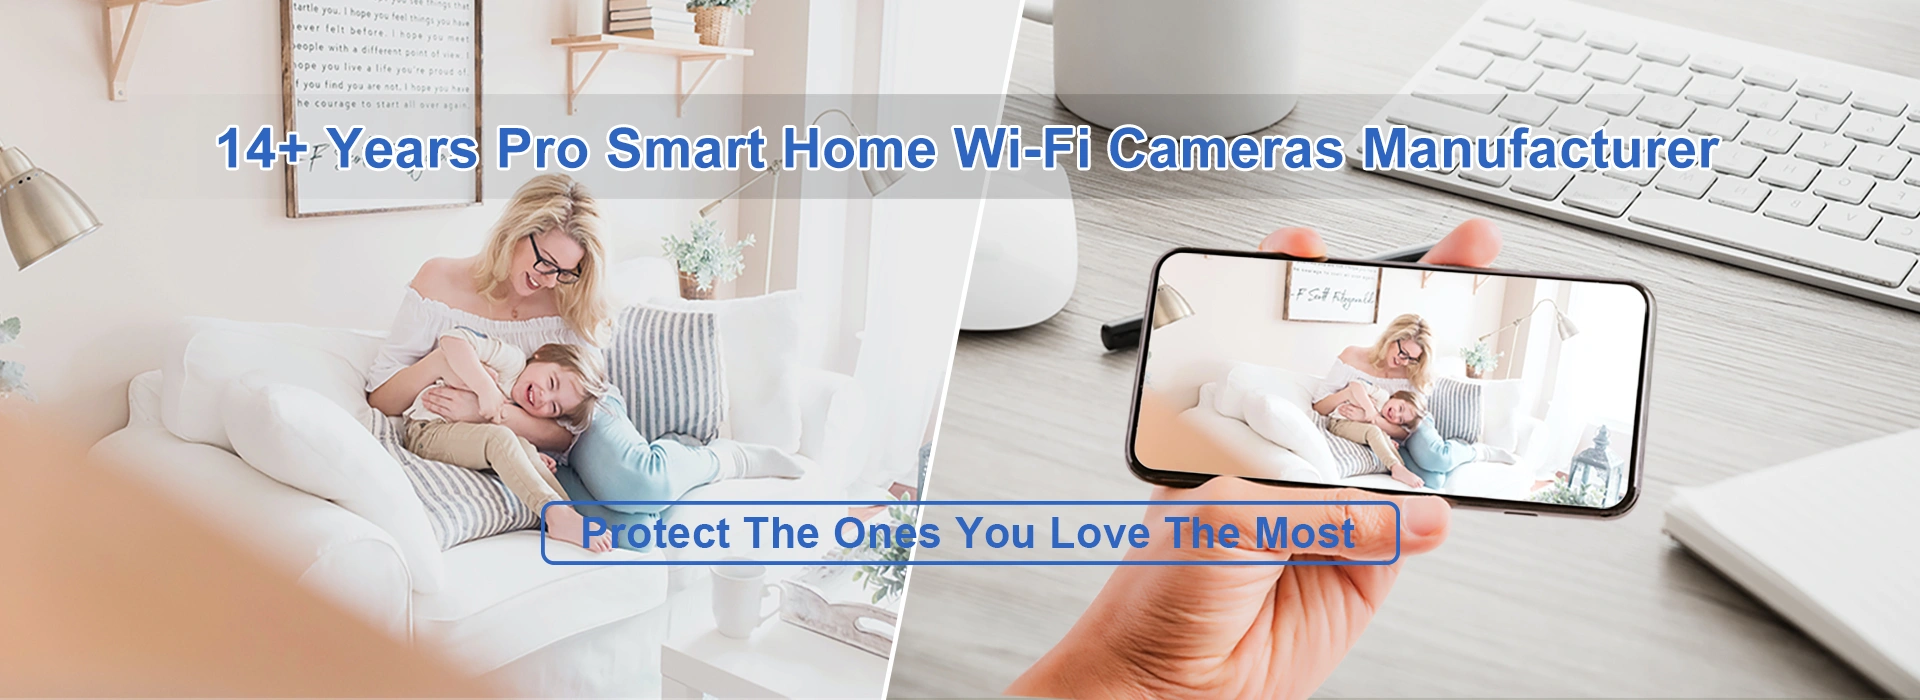 14+ Years Pro Smart Home Wi-Fi Cameras Manufacturer